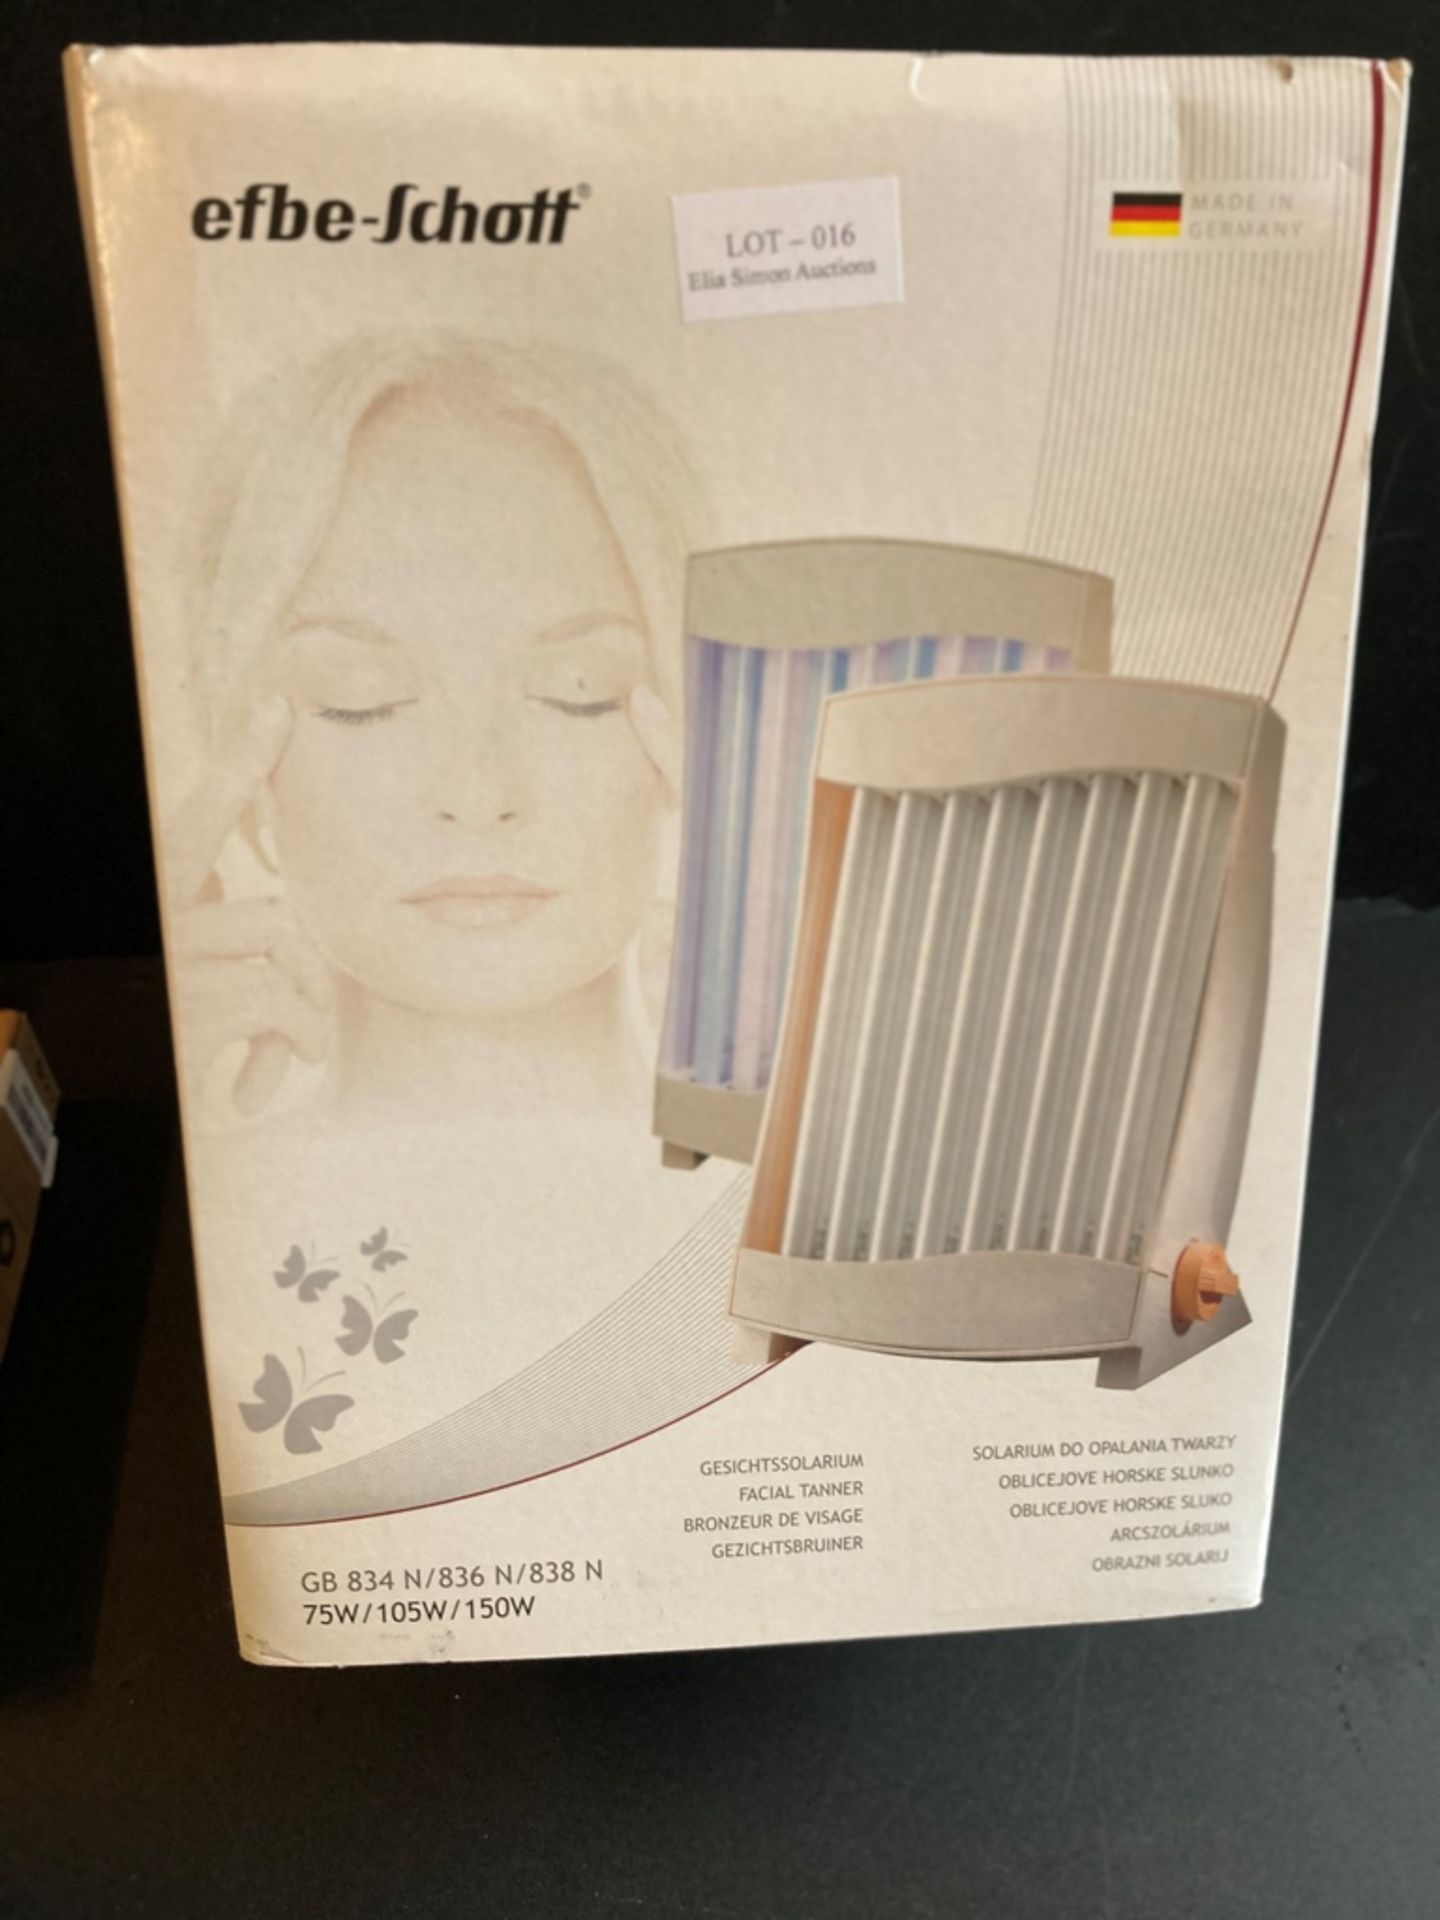 RRP £125-Efbe-Schott Wellness Face Lamp with 6 Tubes, 105 W, Includes 2 Protective Eye Goggles, Peac - Image 2 of 2